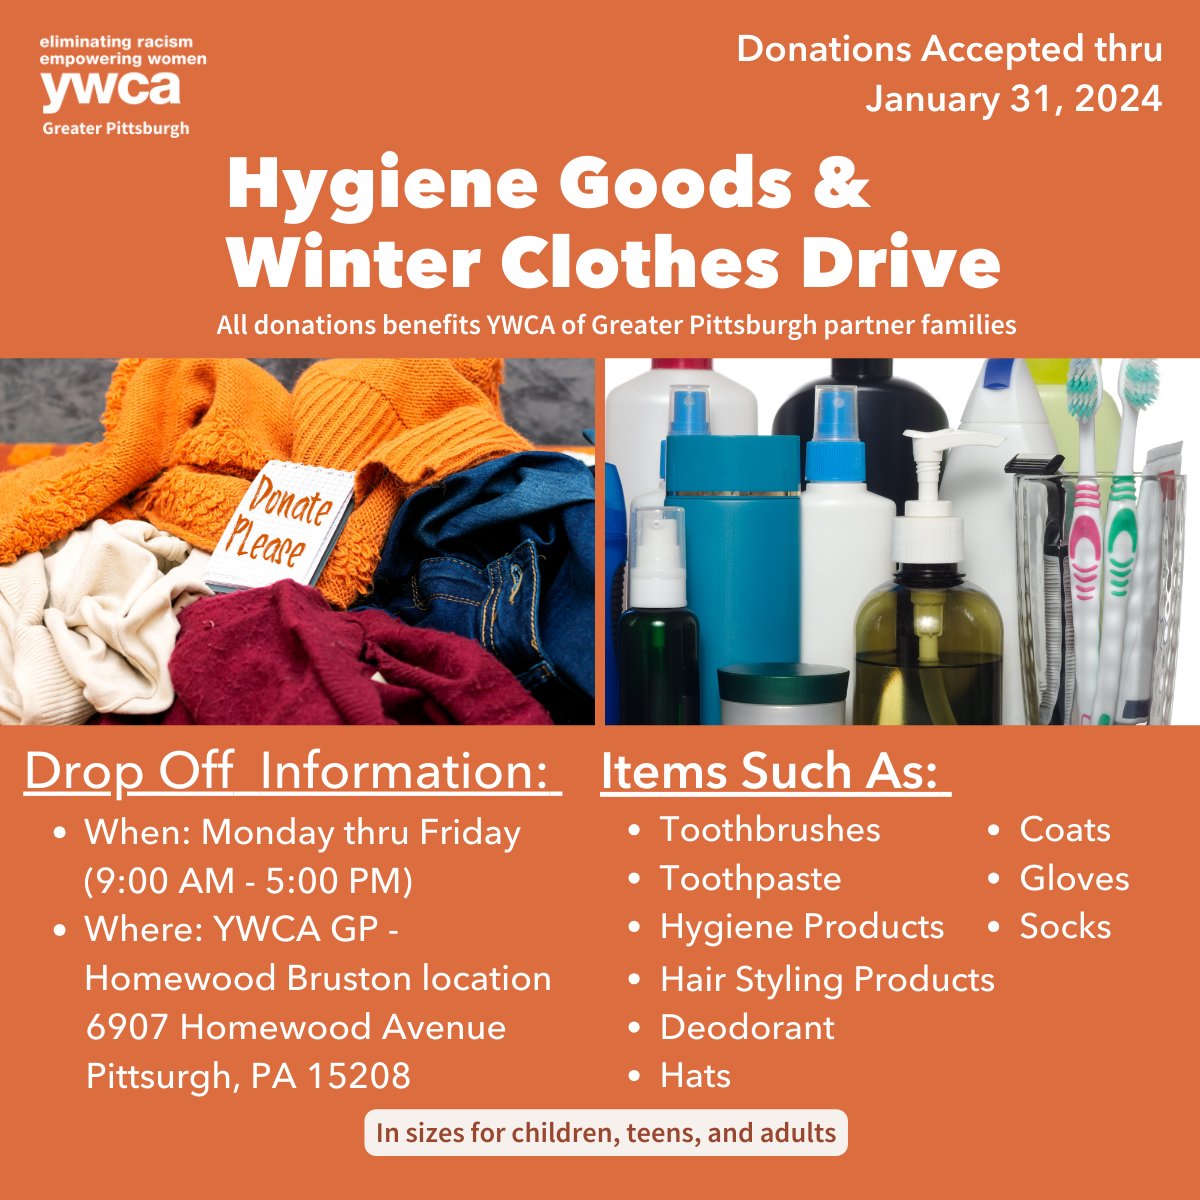 Please donate to @ywcapgh Hygiene Goods & Winter Clothes Drive. Your support can make this season warmer for our neighbors. Please drop off donations at @ywcapgh Homewood-Brushton - 6907 Frankstown Avenue, PGH, PA 15208. All donations benefit @ywcapgh partner families.